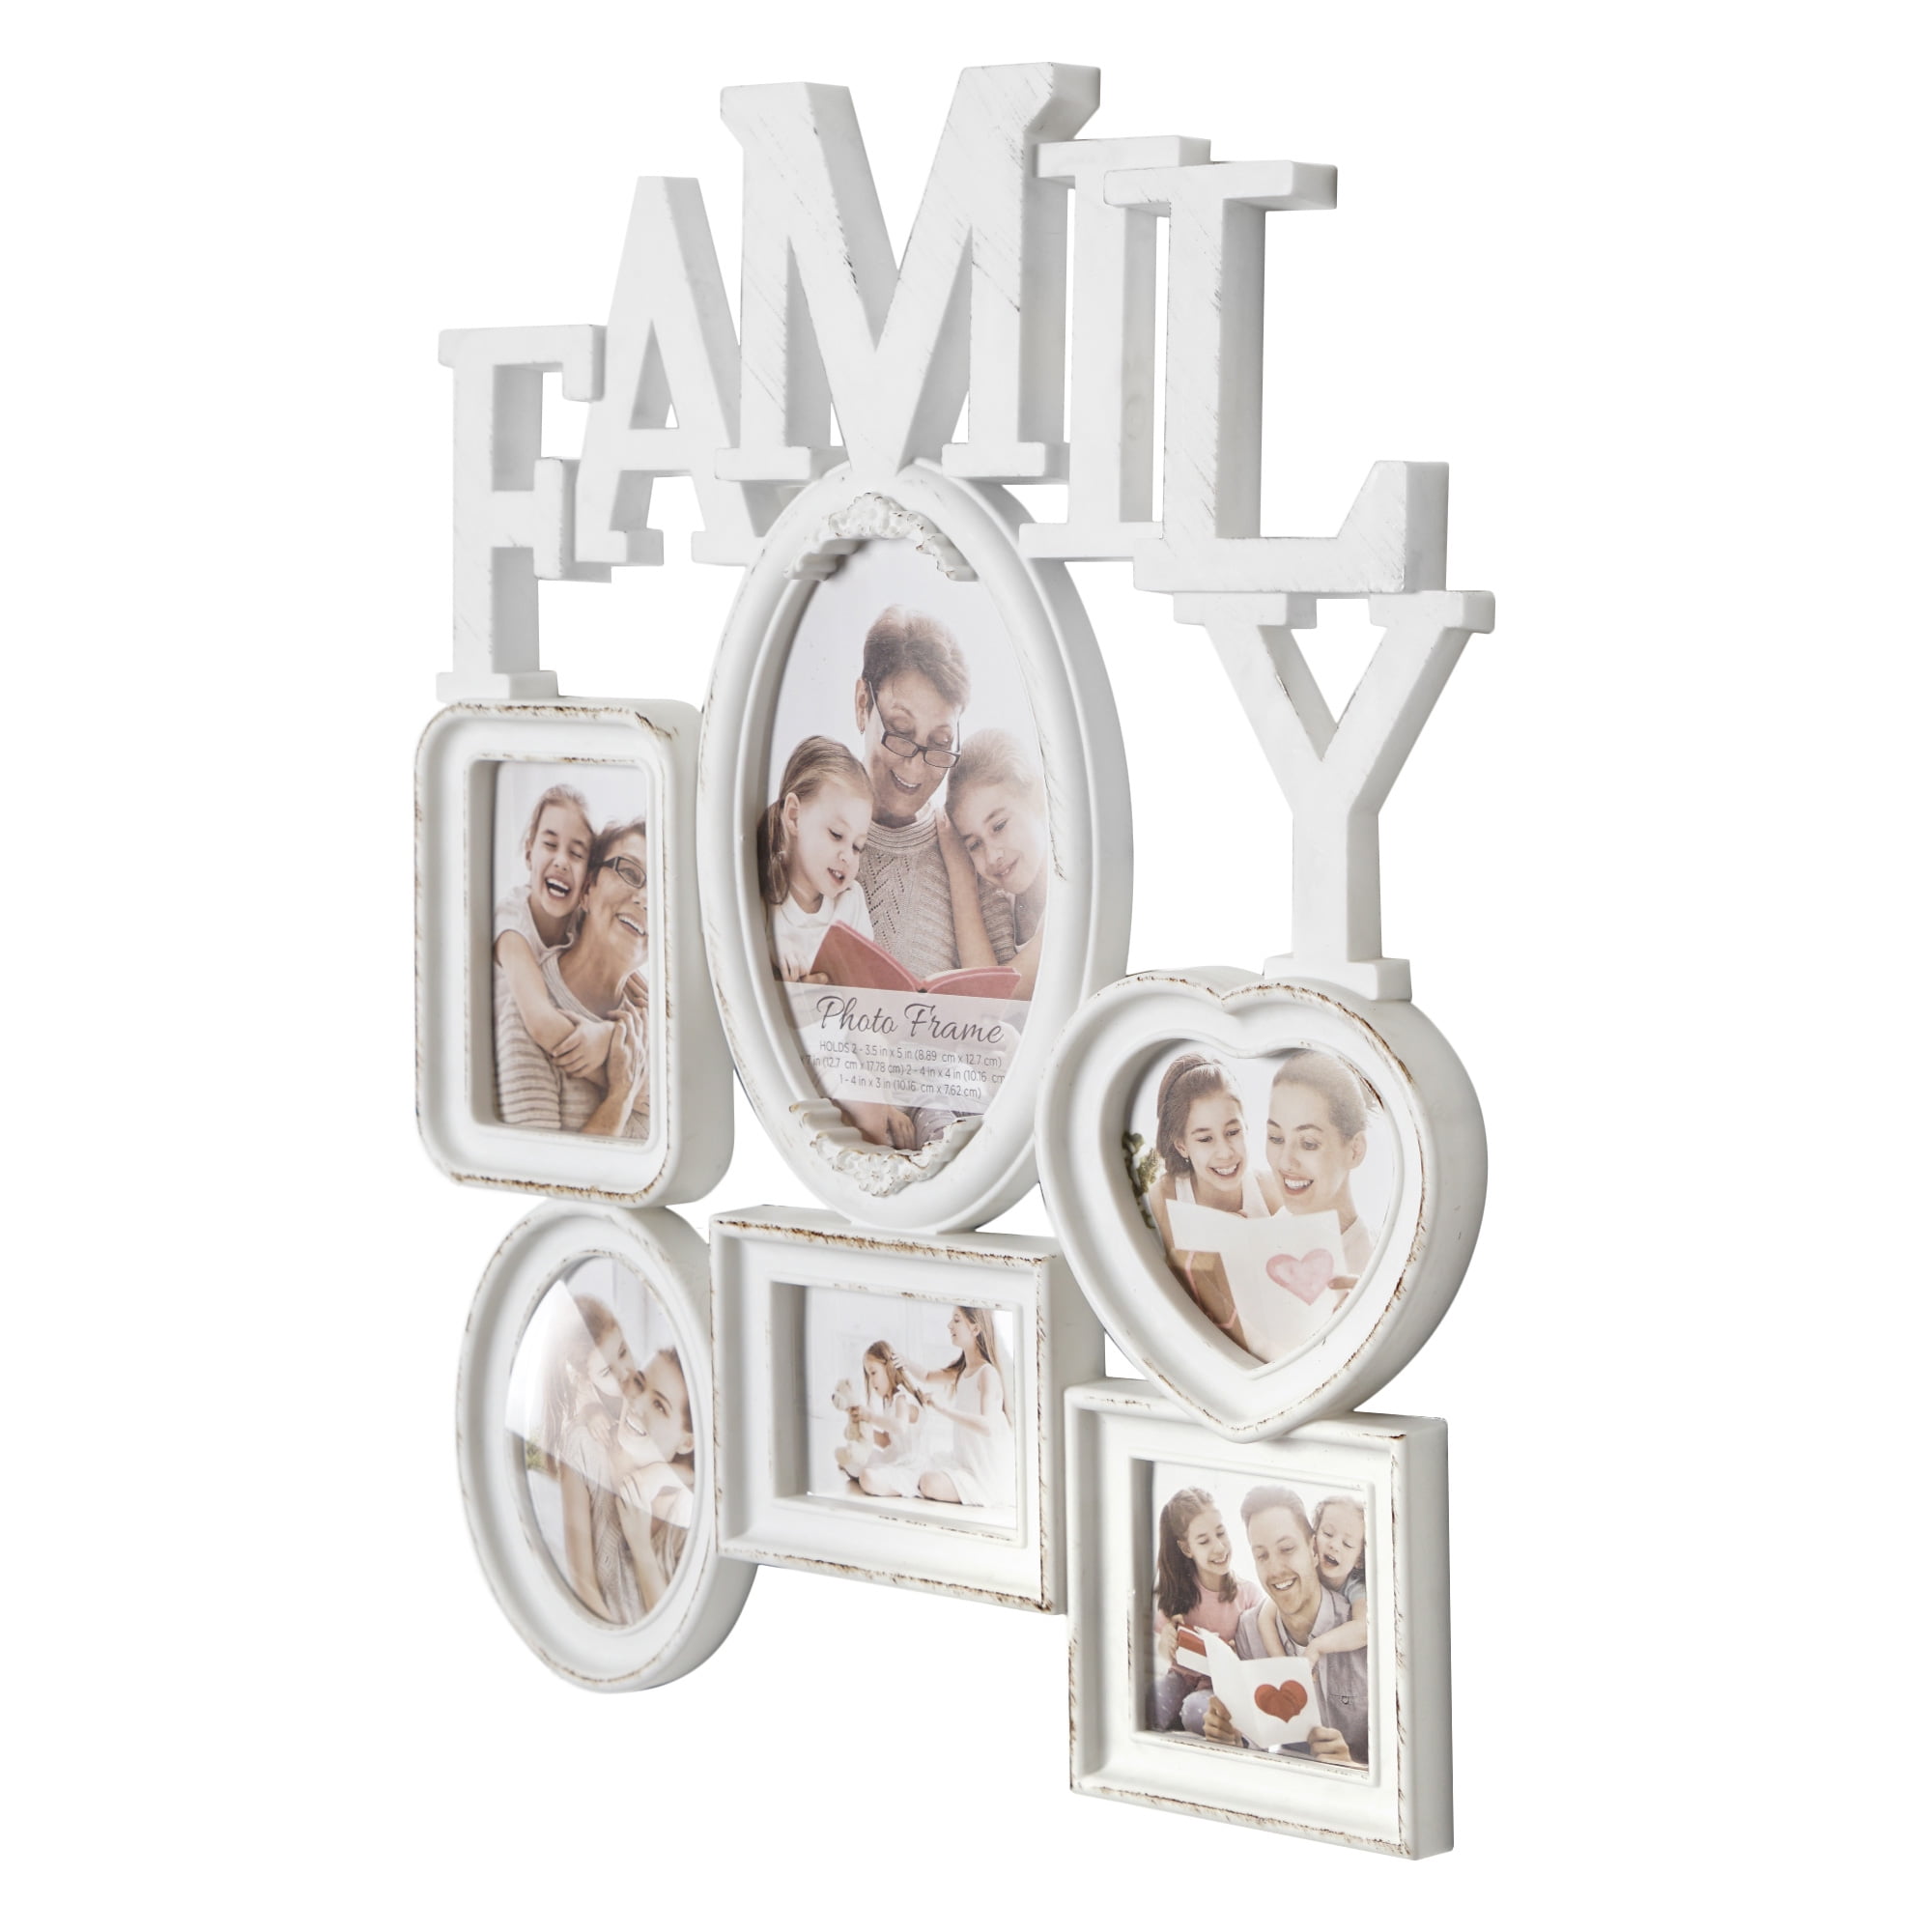 Family Picture Photo Frame Holds 12 Photos Aperture Hanging Multi Frame White 